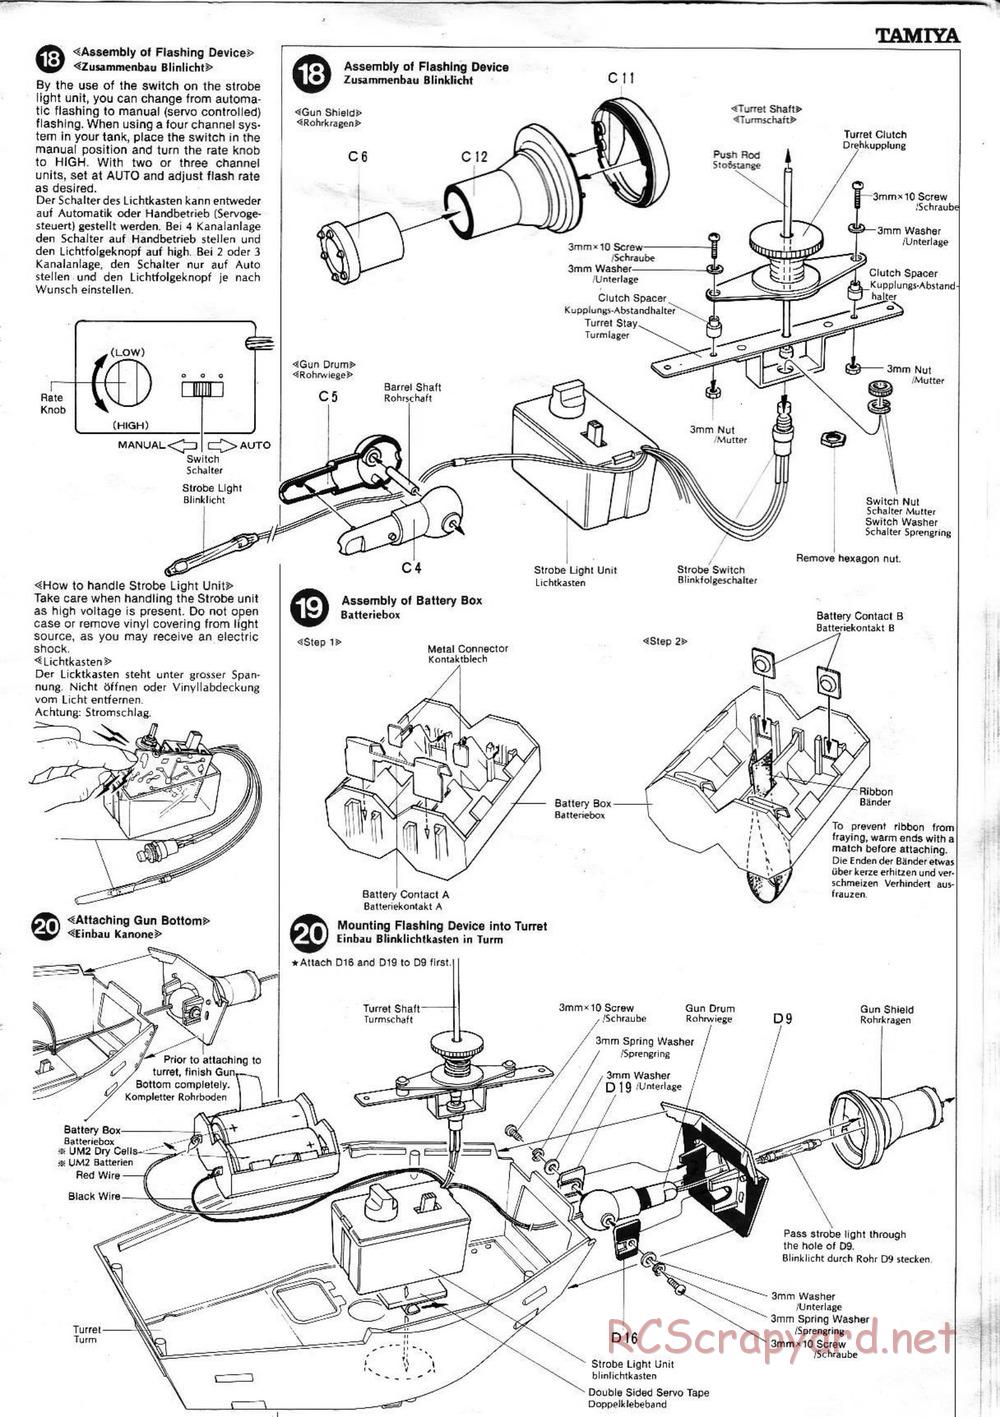 Tamiya - King Tiger (Production Turret) - 1/16 Scale Chassis - Manual - Page 9